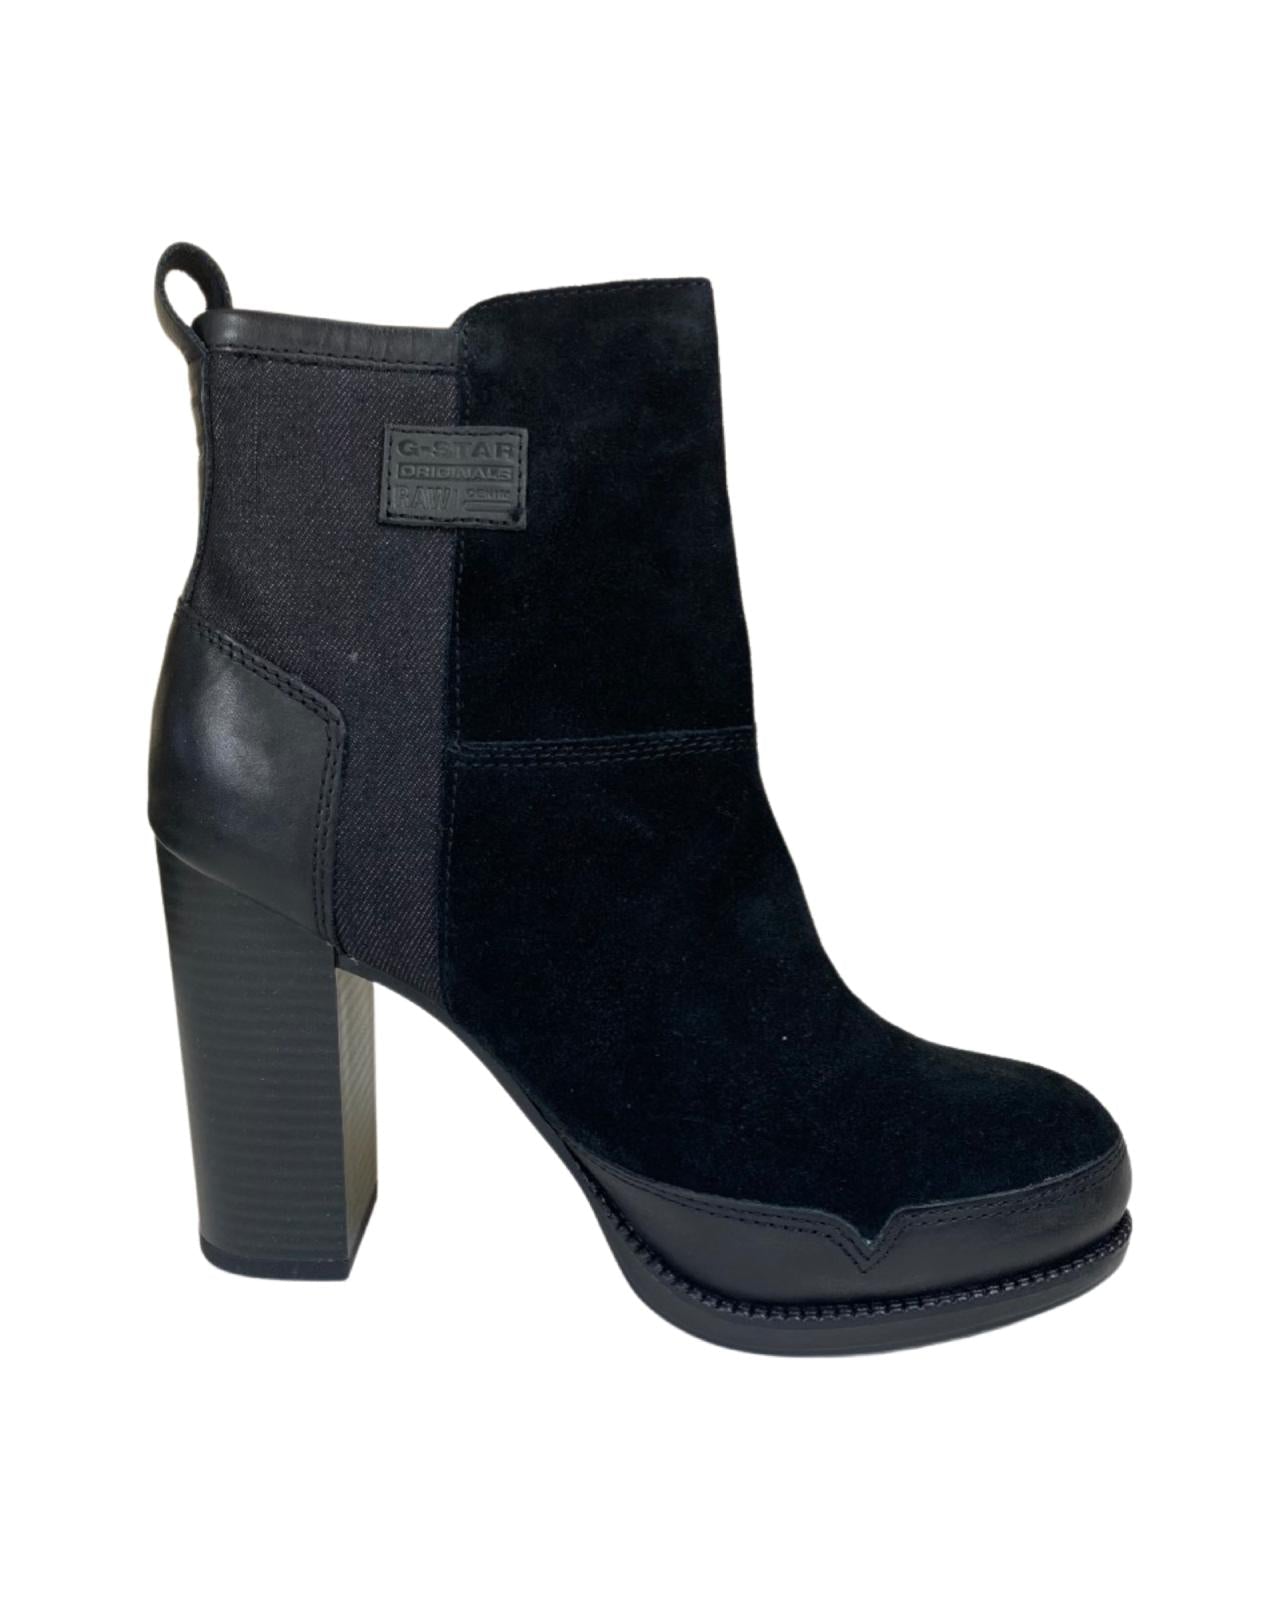 G-Star Raw Black Labour Zip Boots EU 39 | UK 6-The Freperie